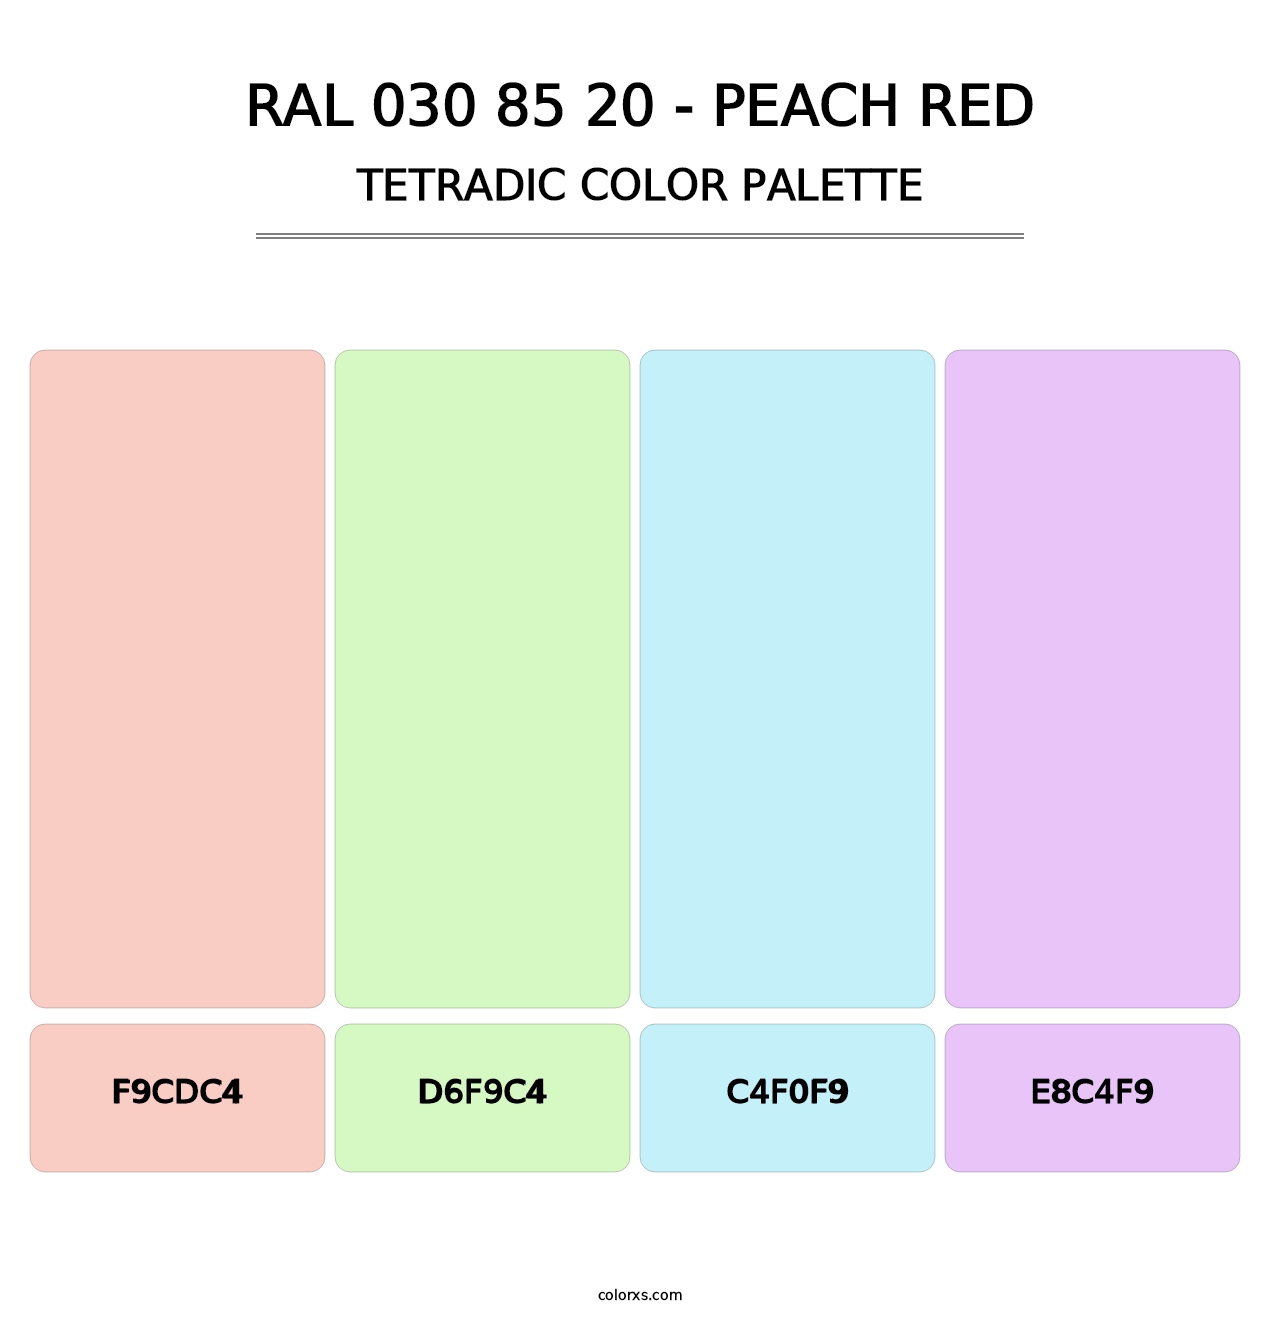 RAL 030 85 20 - Peach Red - Tetradic Color Palette